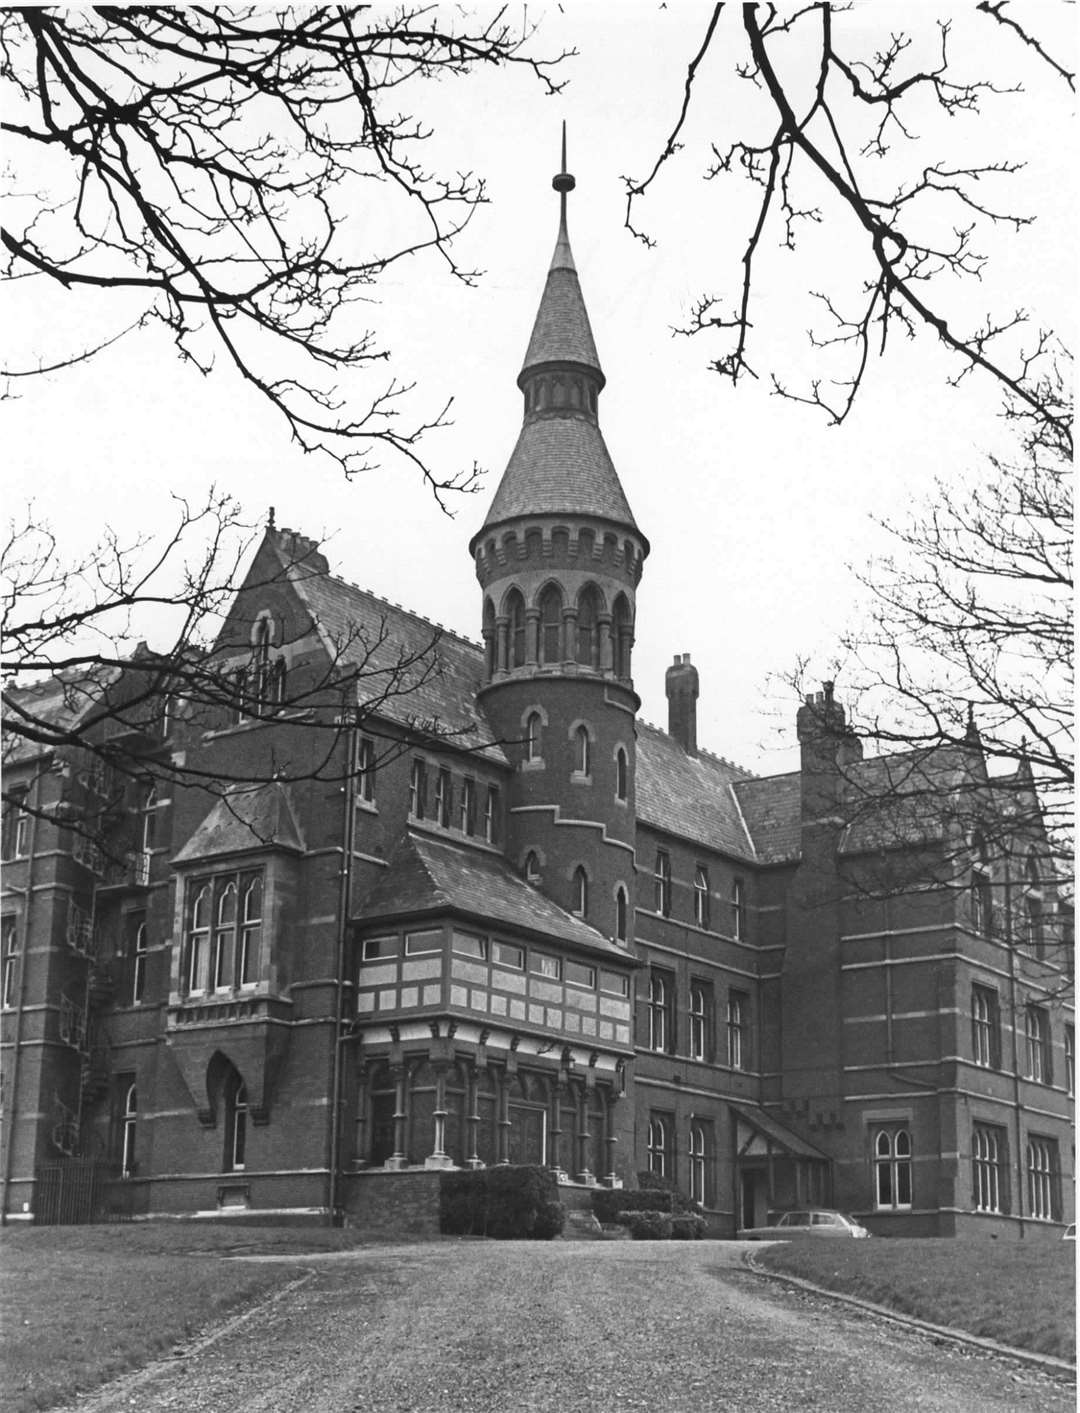 The Royal School for Deaf Children in Margate pictured in March 1968